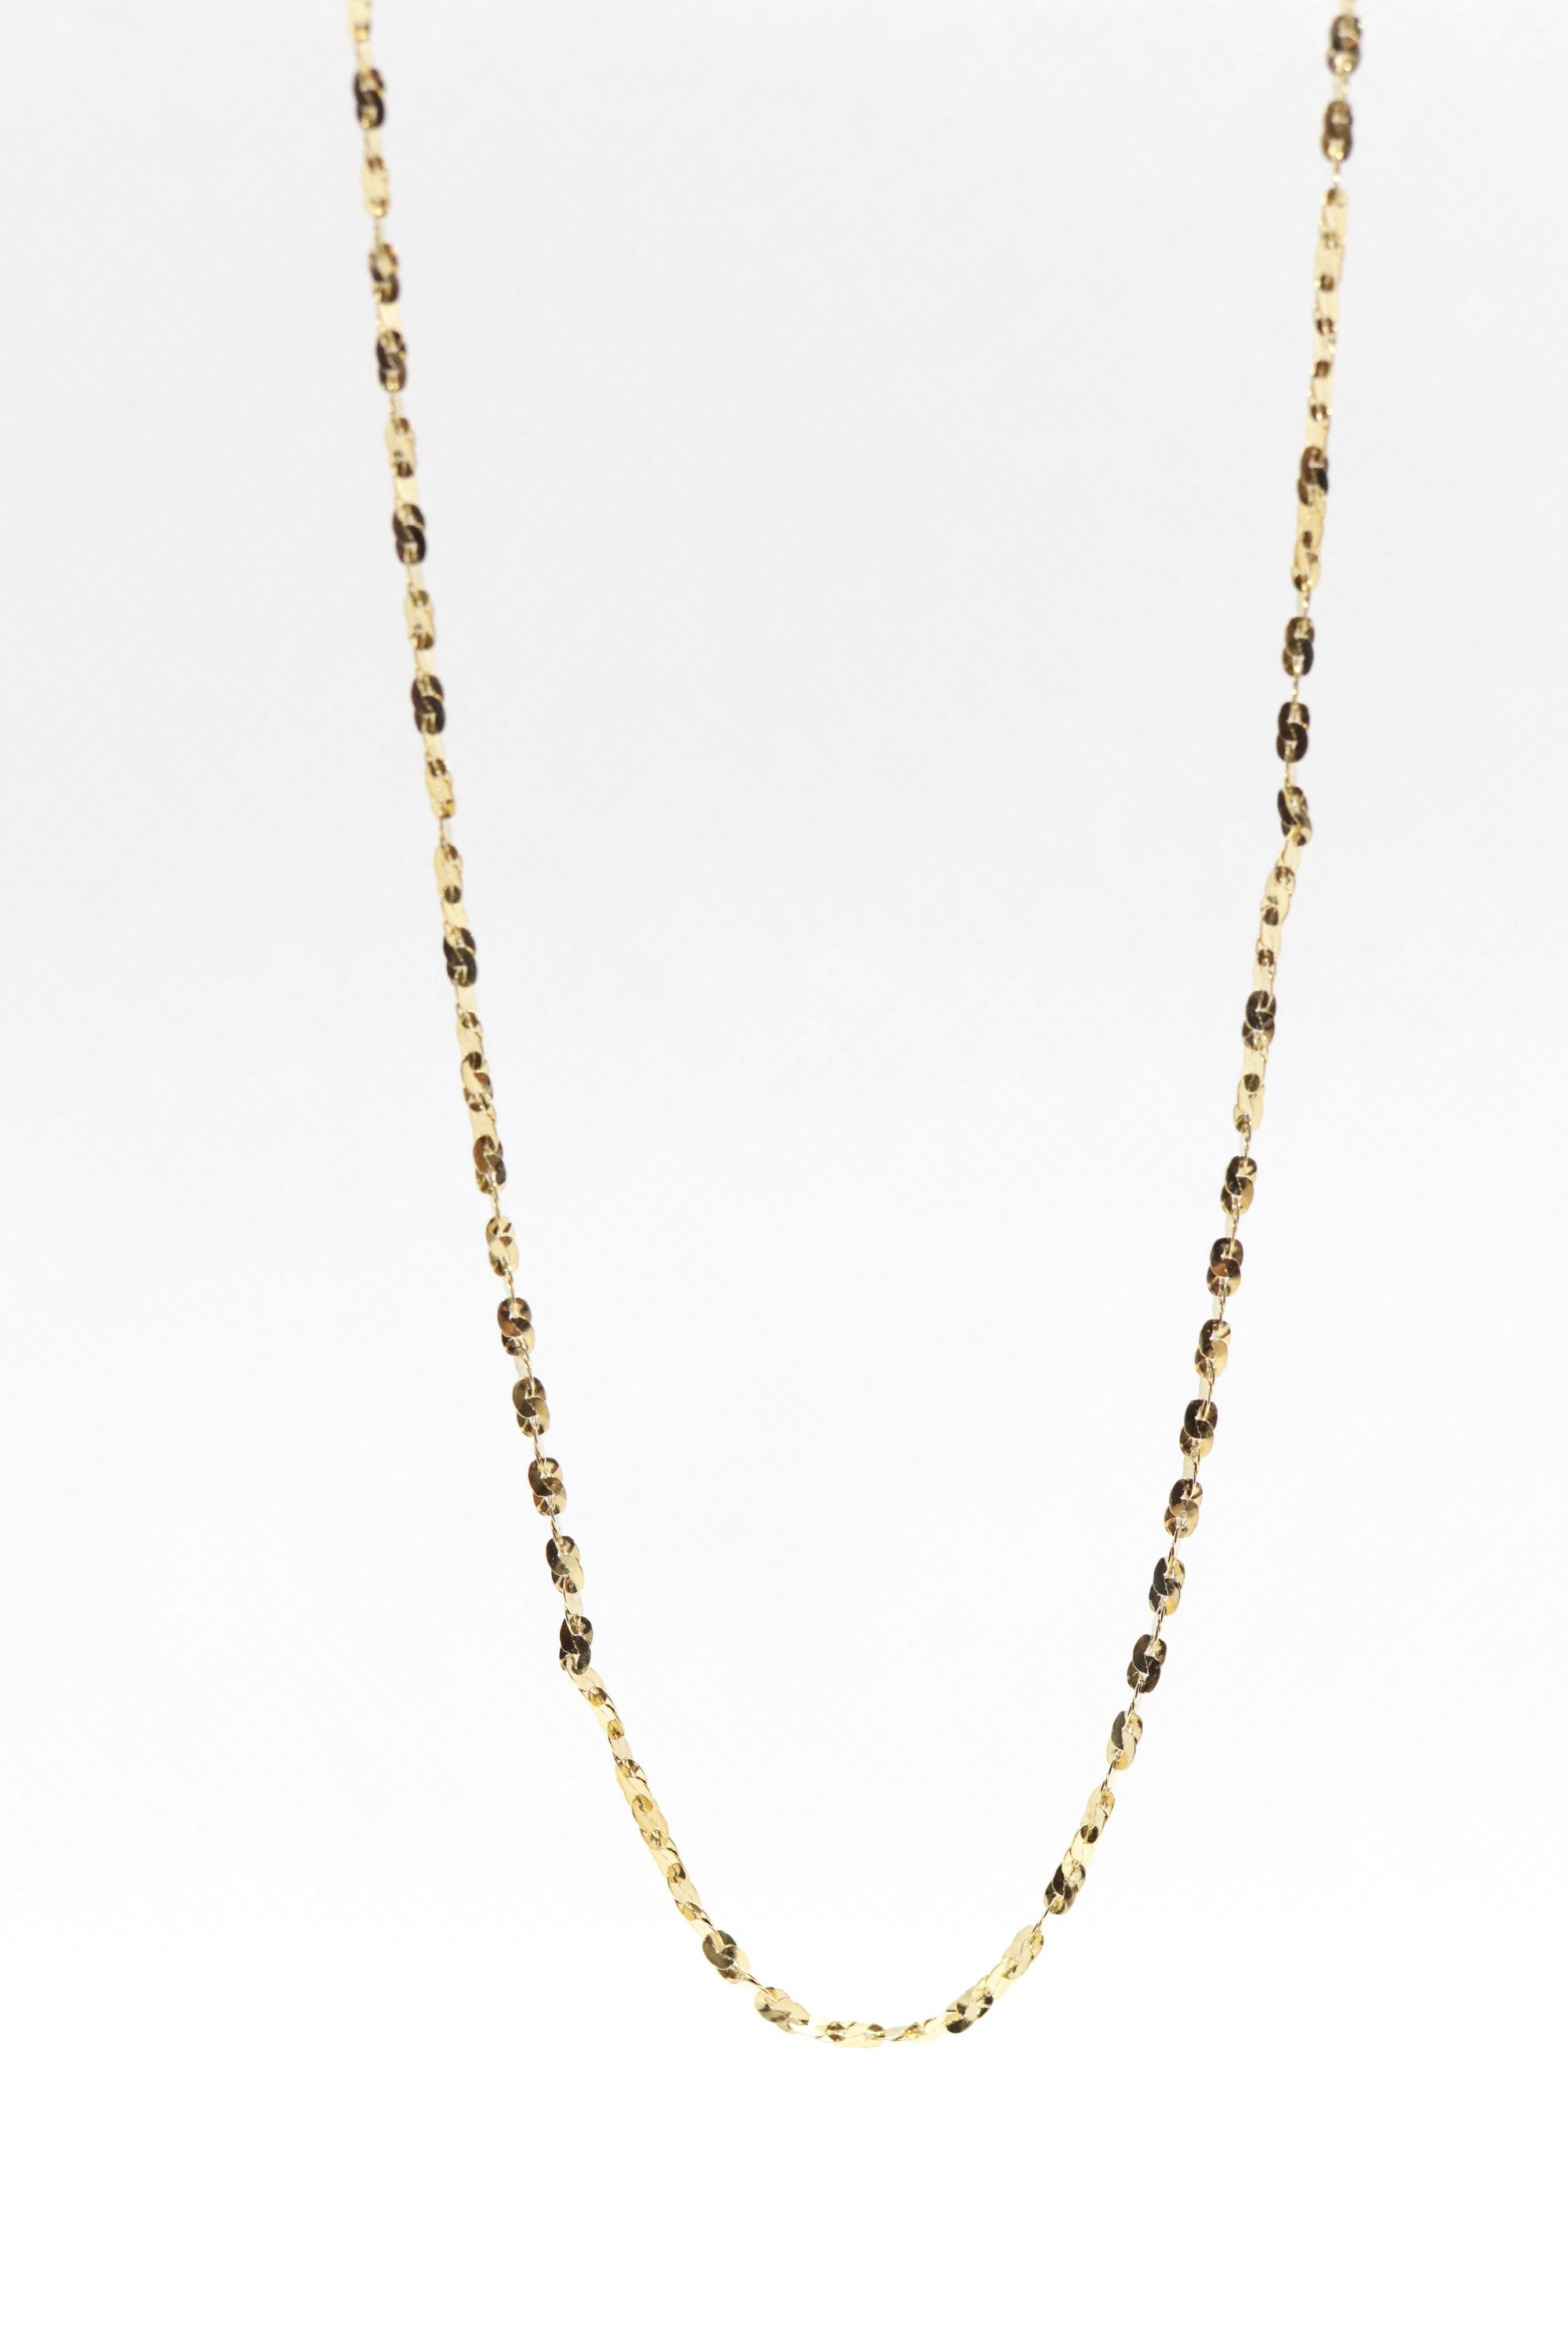 14k Necklace Speciality Chain Made in Italy. 16in - Etsy Finland